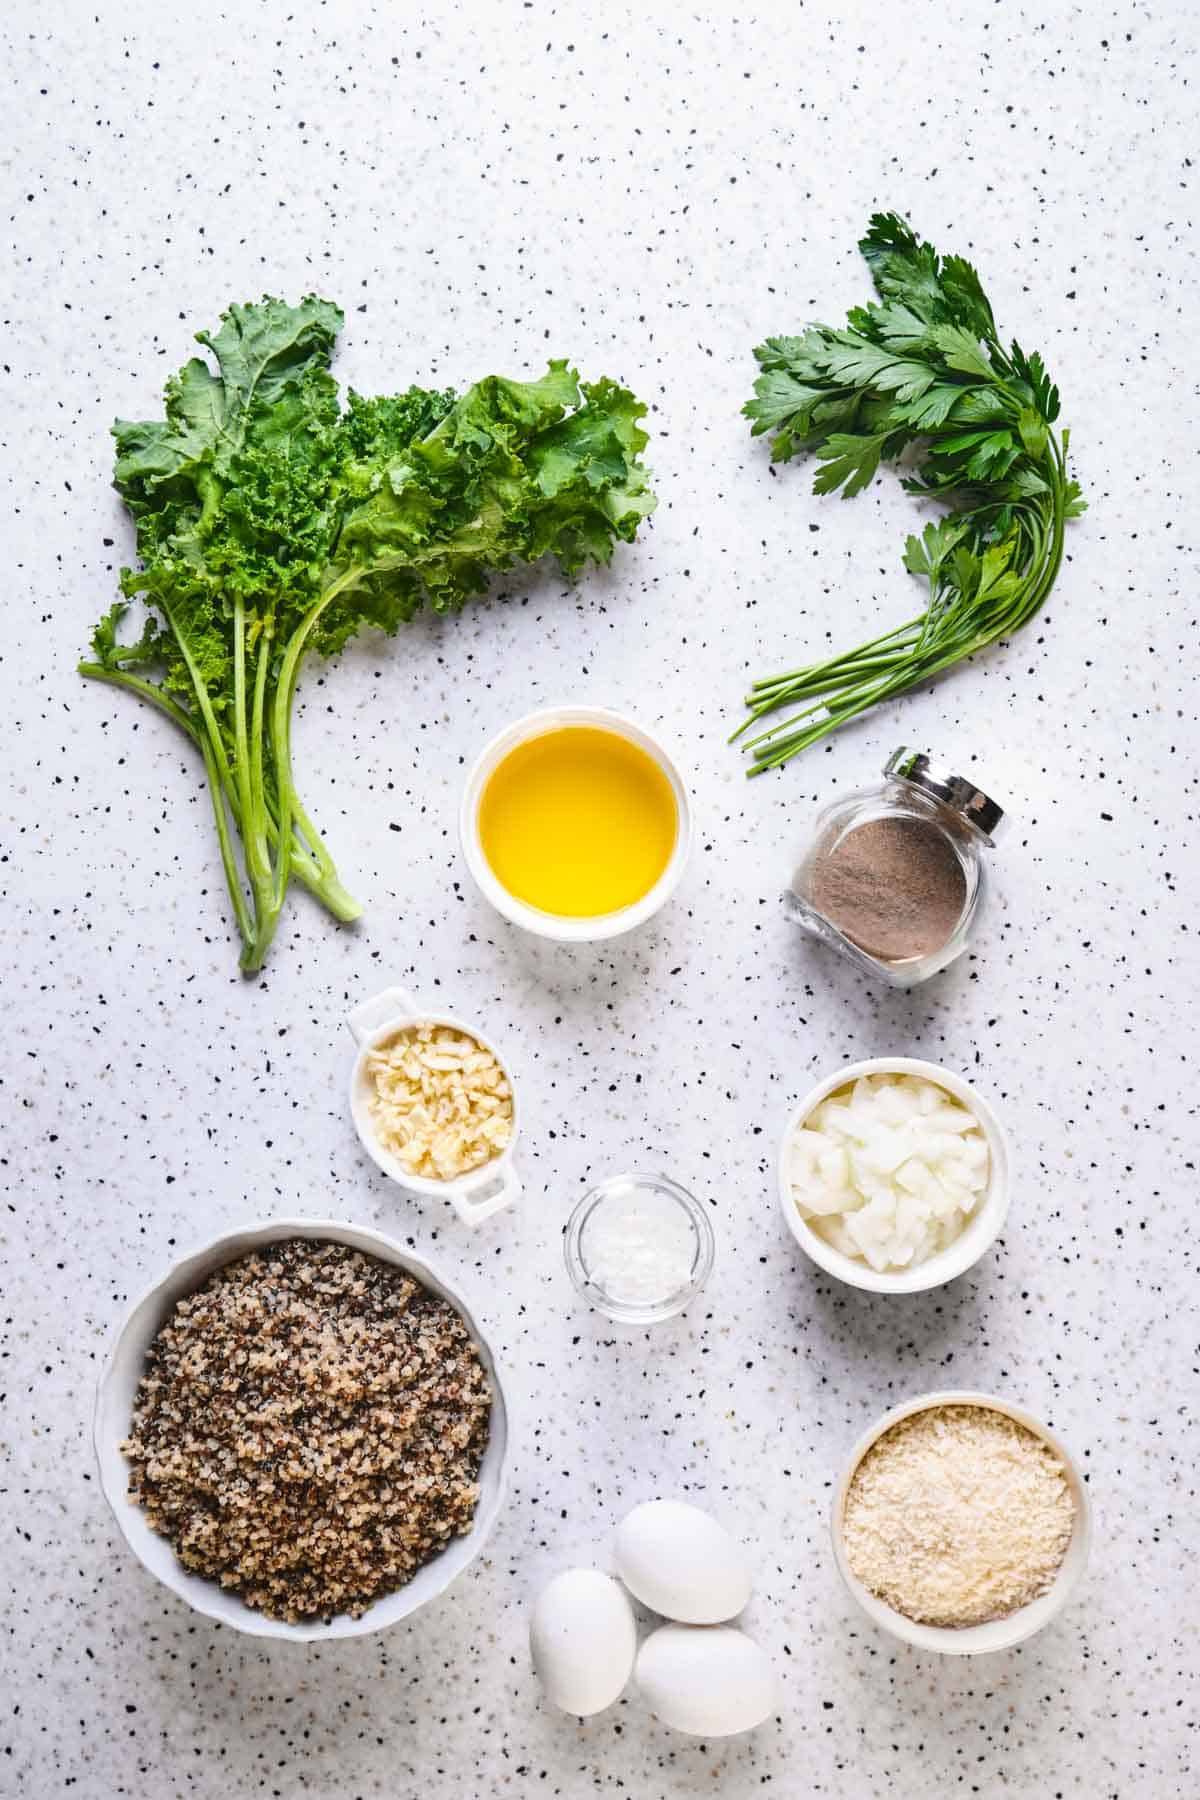 Ingredients needed for kale and quinoa cakes.